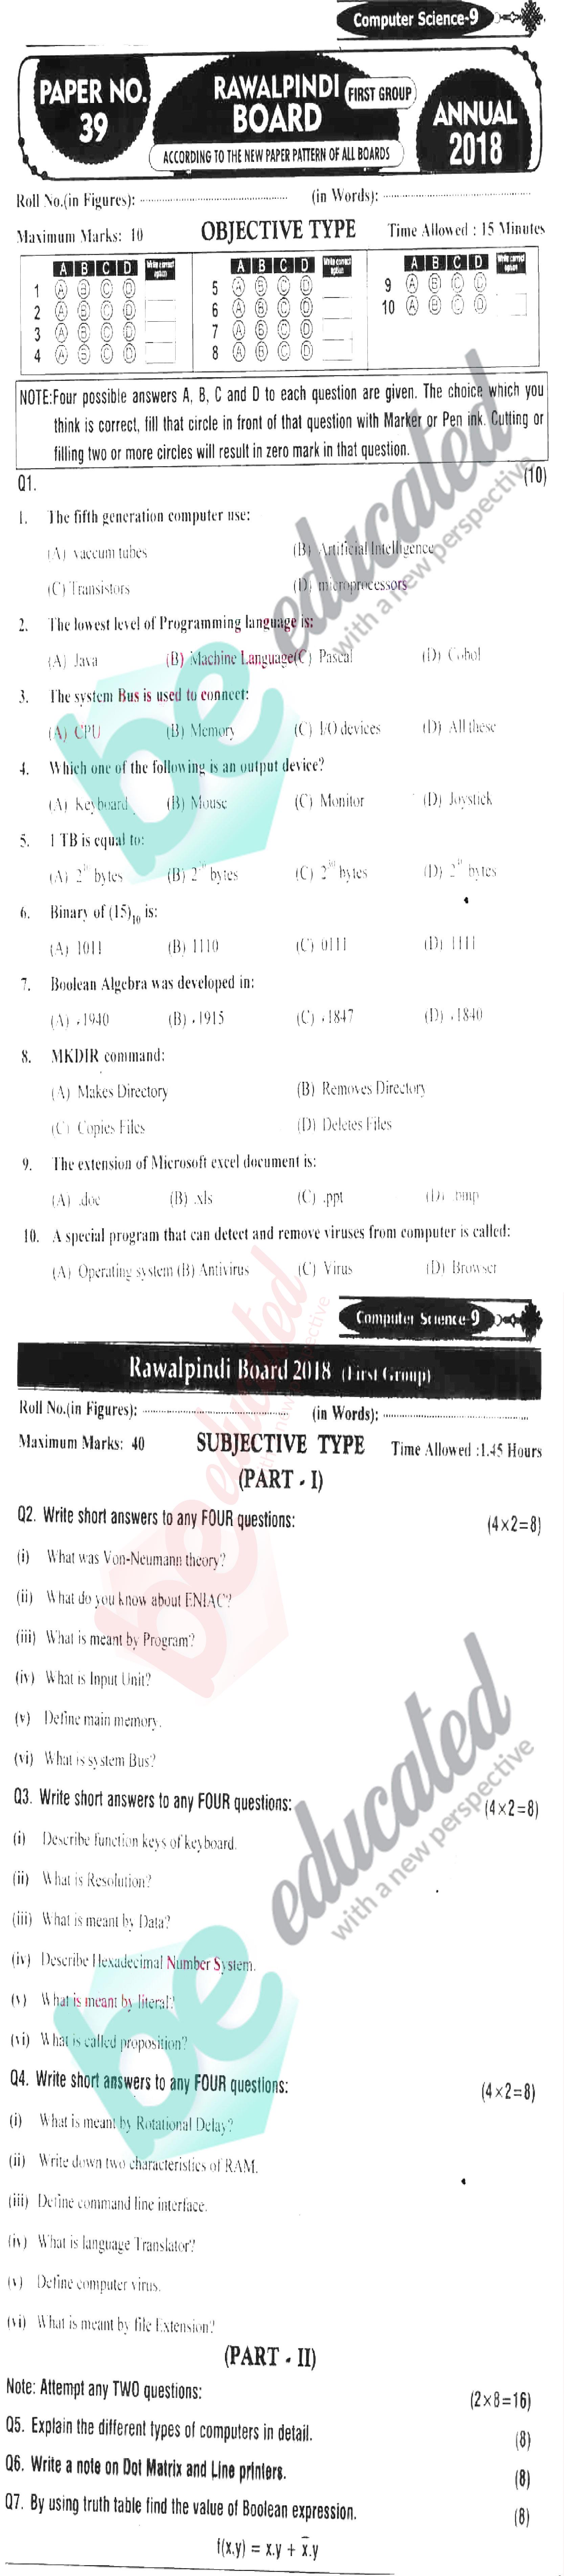 Computer Science 9th Class Past Paper Group 1 BISE Rawalpindi 2018